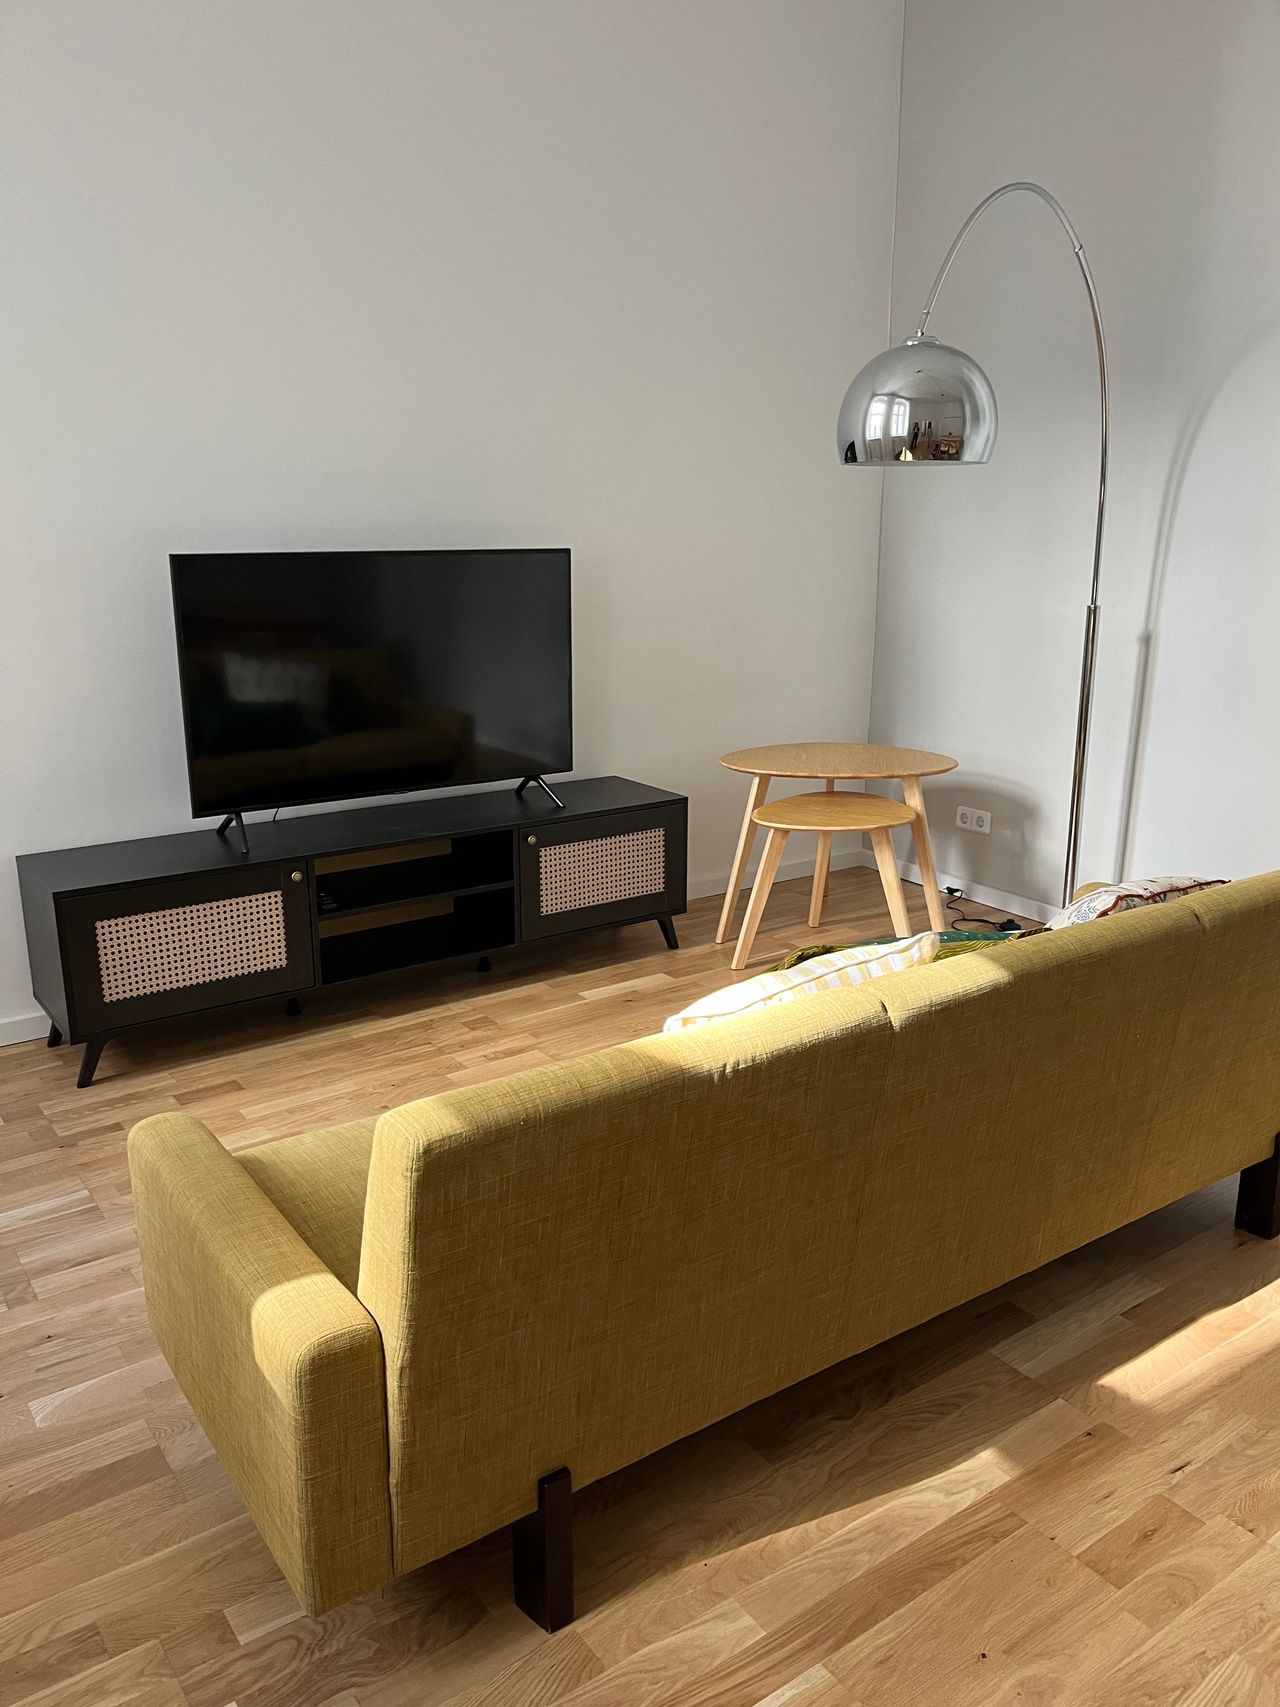 Beautiful and fully Furnished 2 Room Stylish Apartment in Trendy Friedrichshain